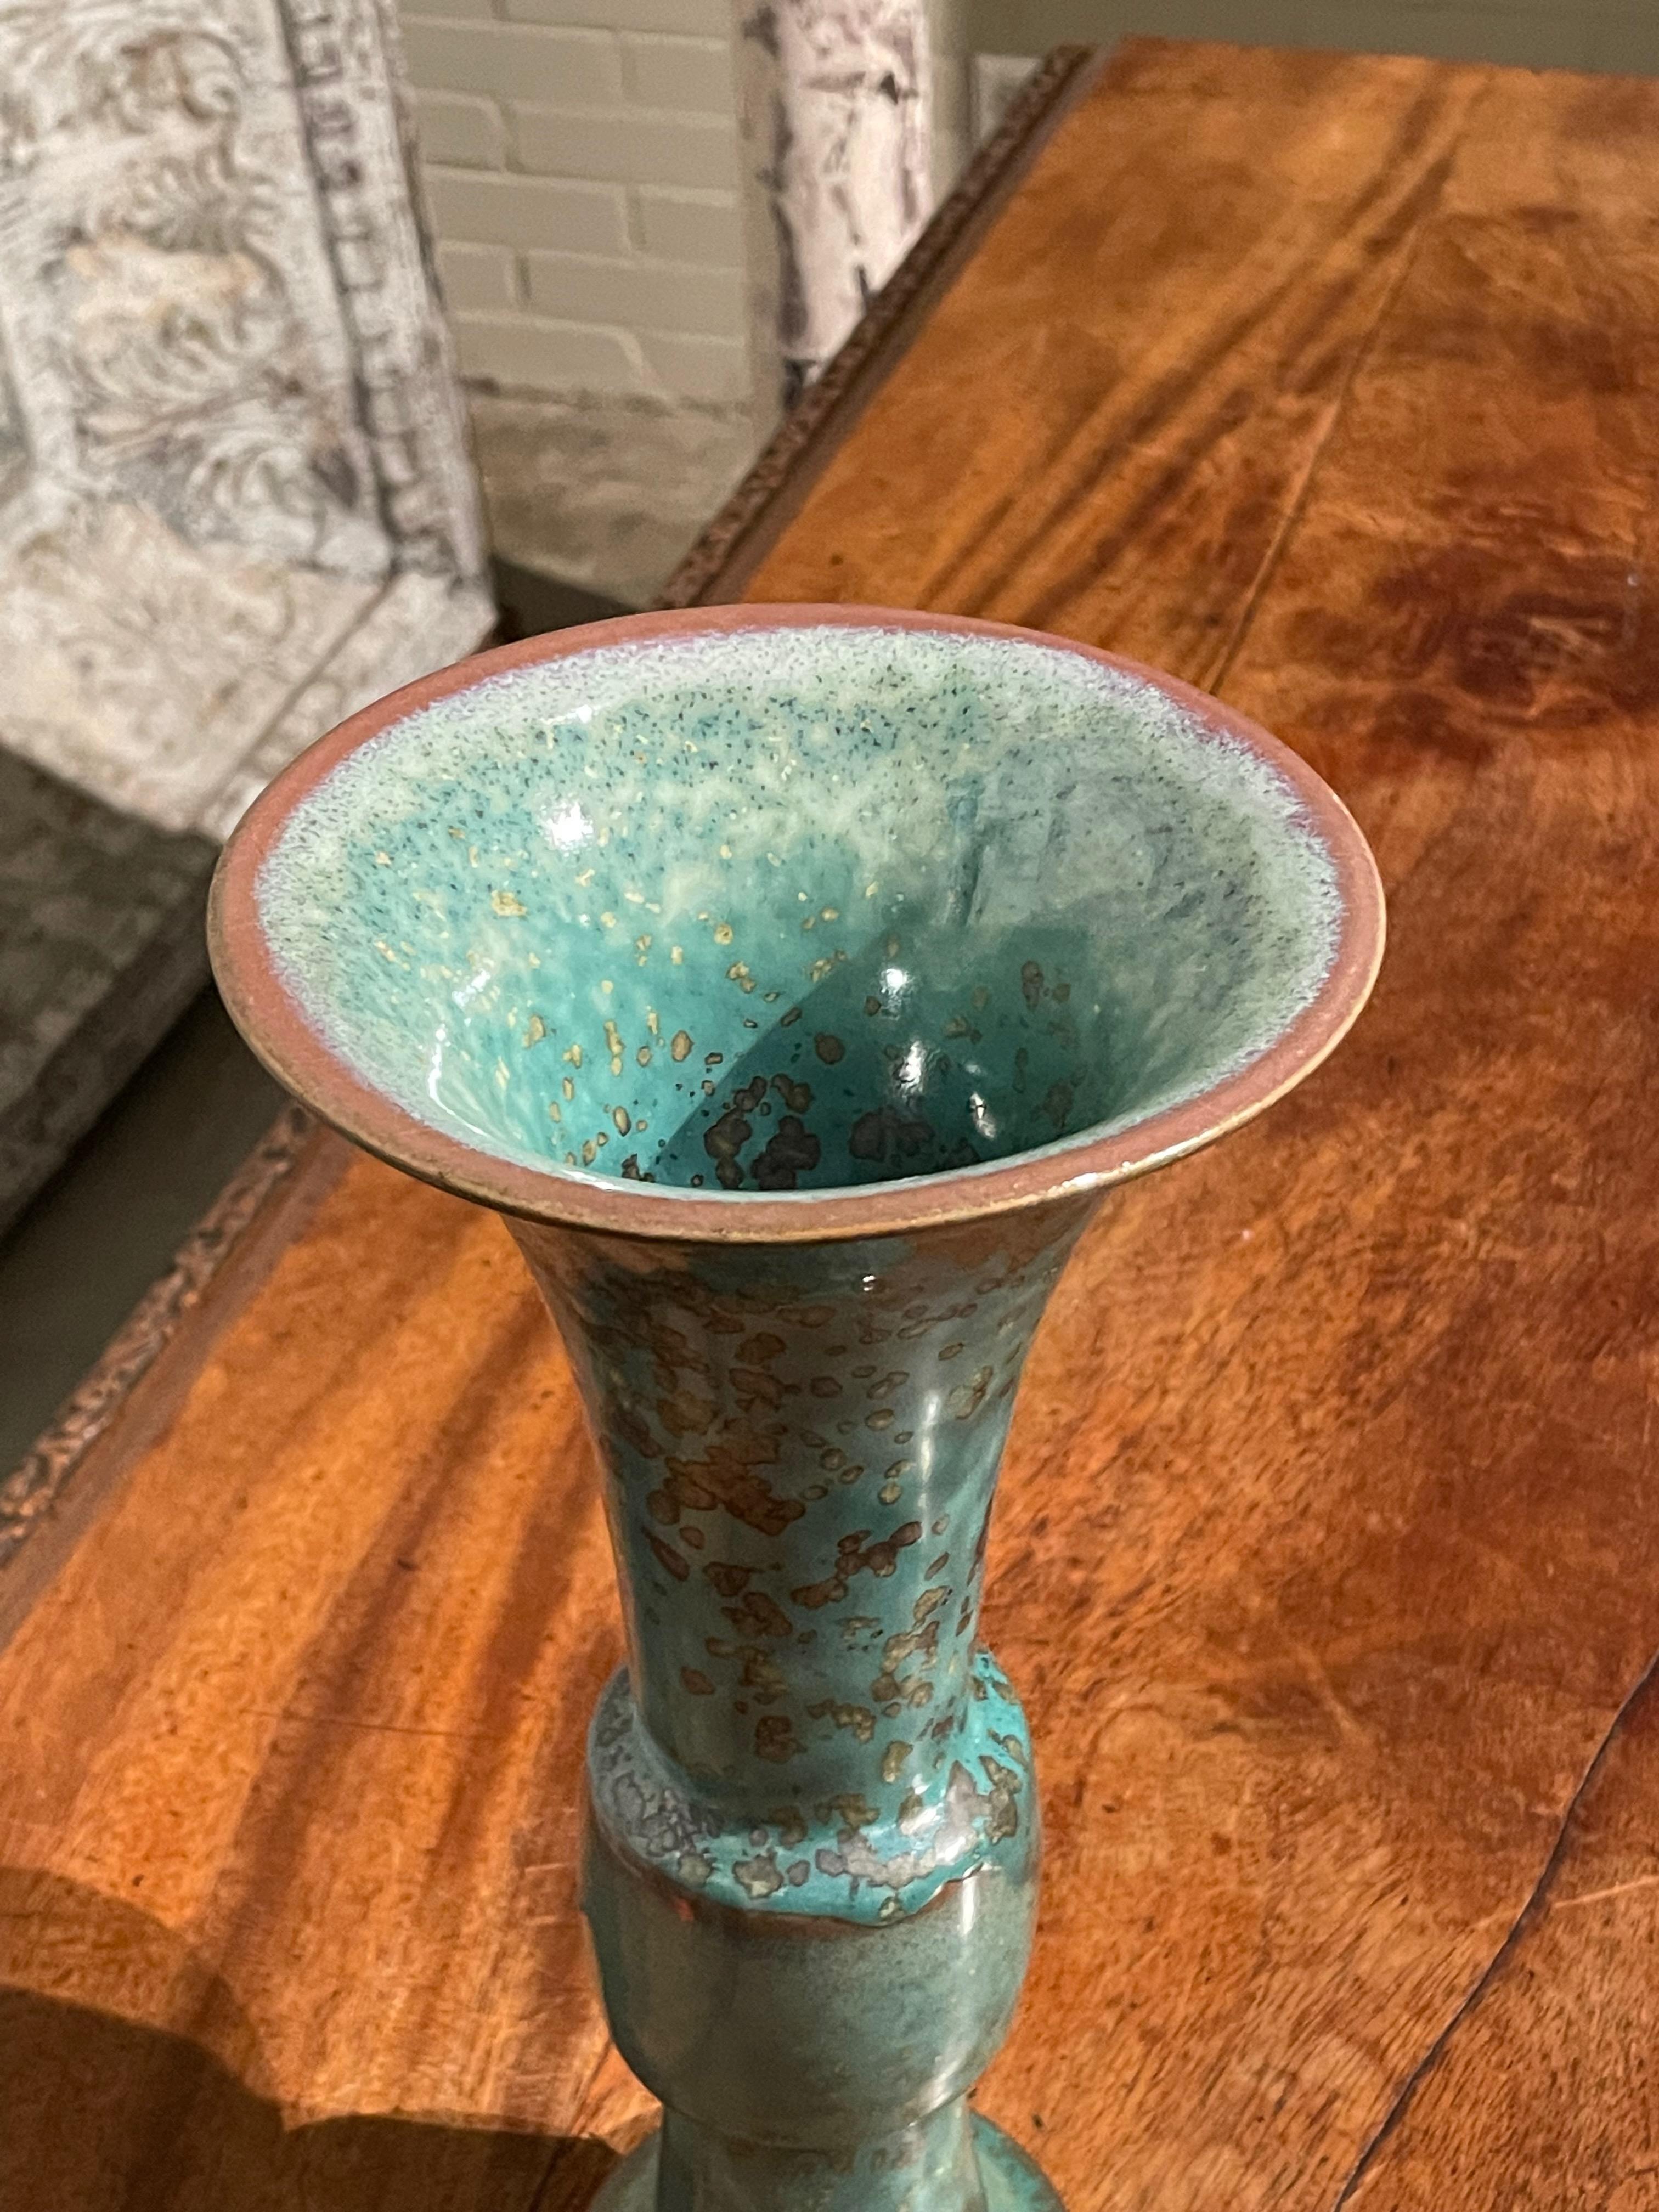 Contemporary Chinese turquoise with gold speckled glaze vase.
Classic tall shape with wide band.
One of several pieces from a large collection.